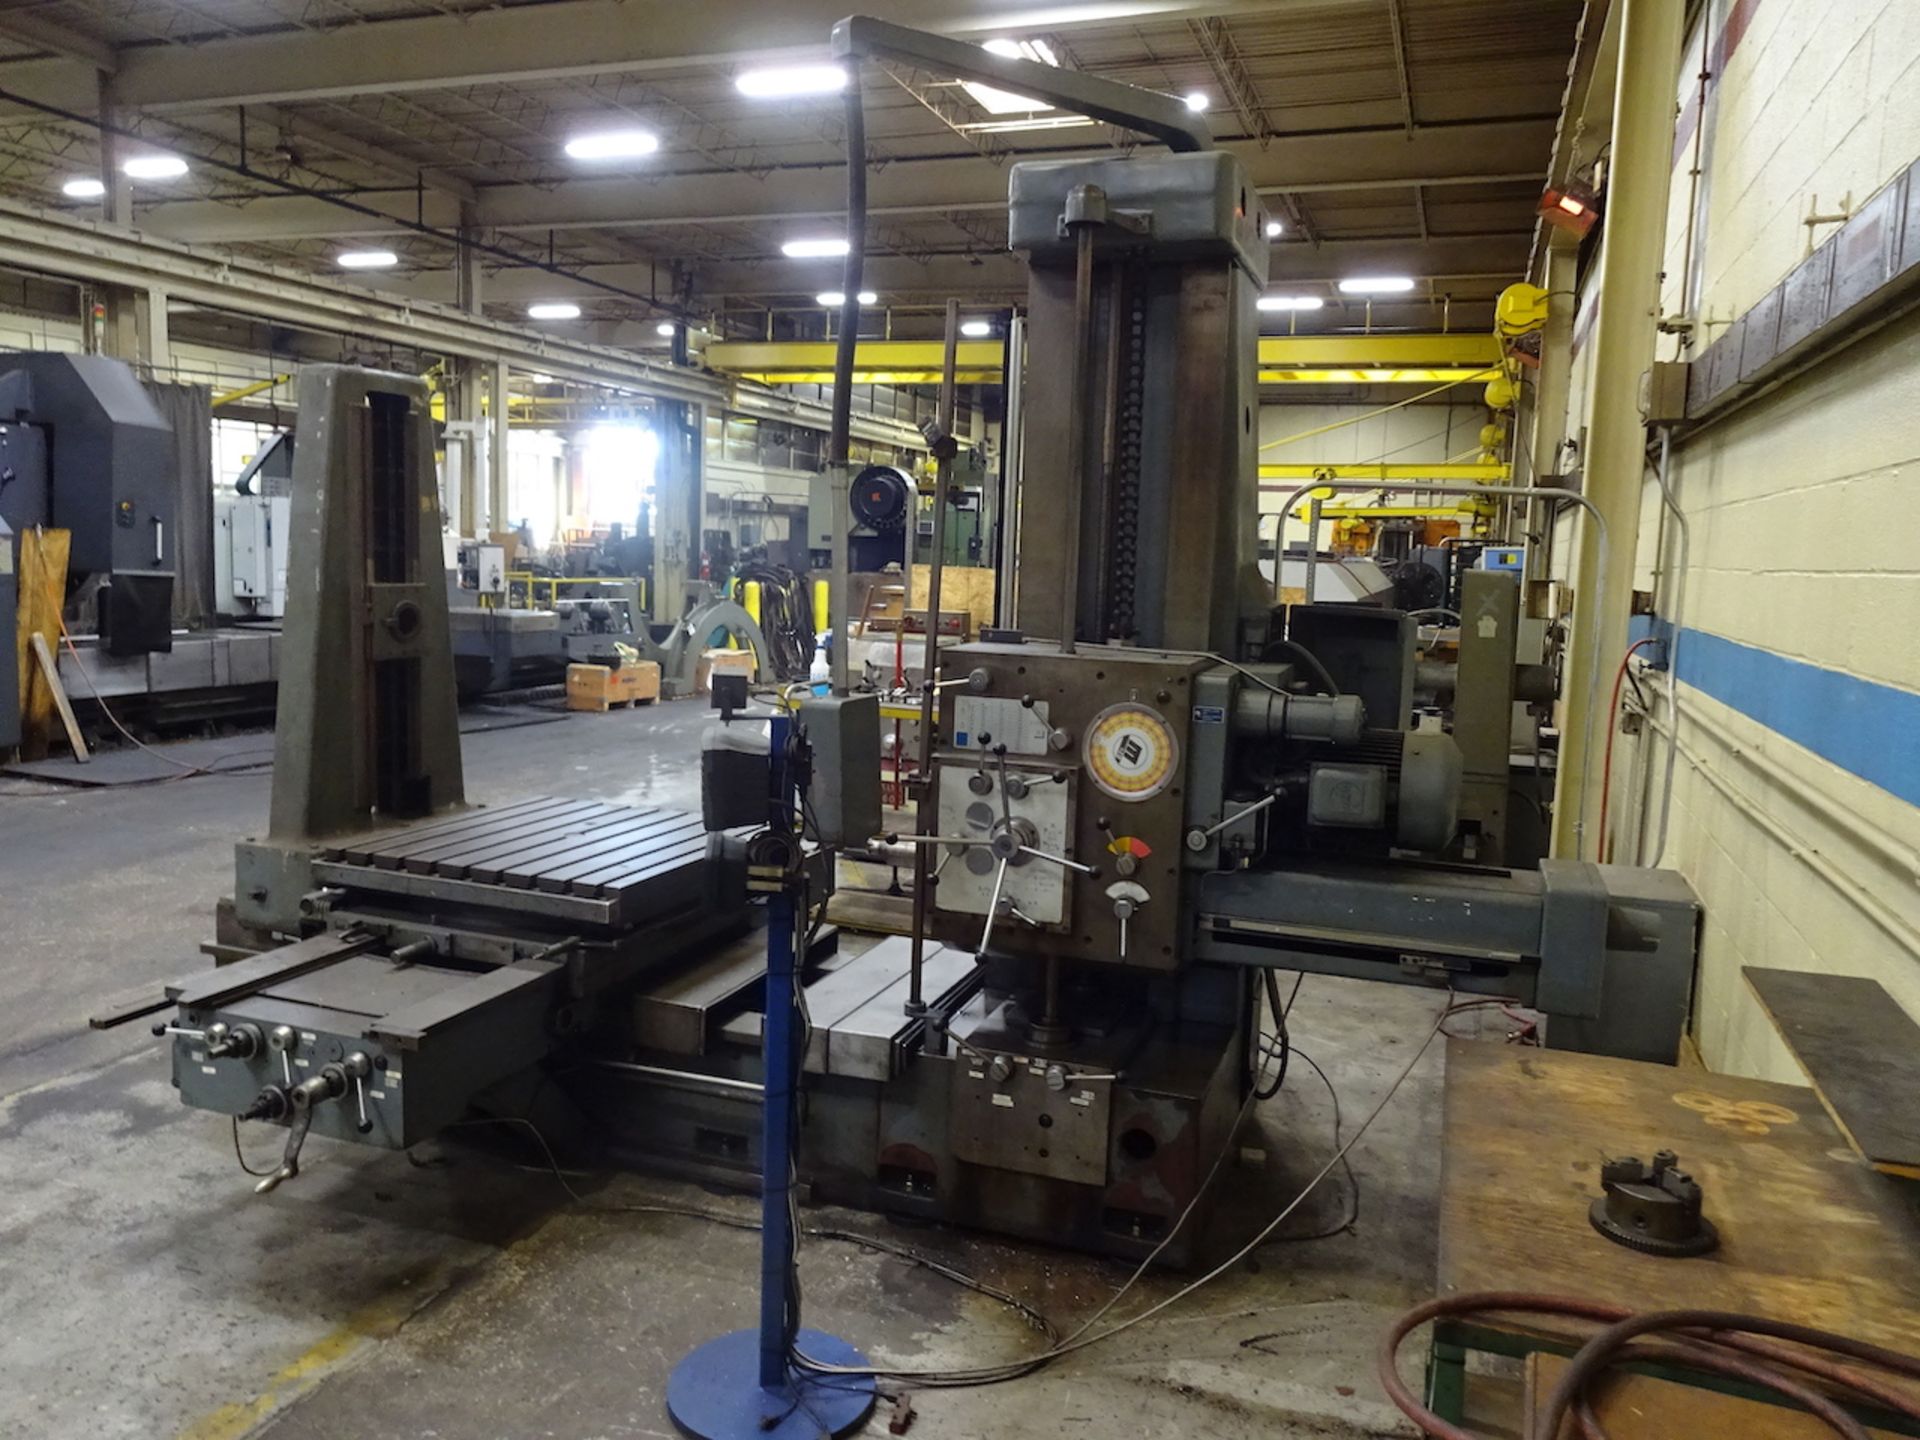 MEUSER MODEL M76BFS HORIZONTAL BORING MILL, S/N M76BFS-45286, 39 X 39 BUILT-IN ROTARY TABLE, 7. - Image 15 of 20